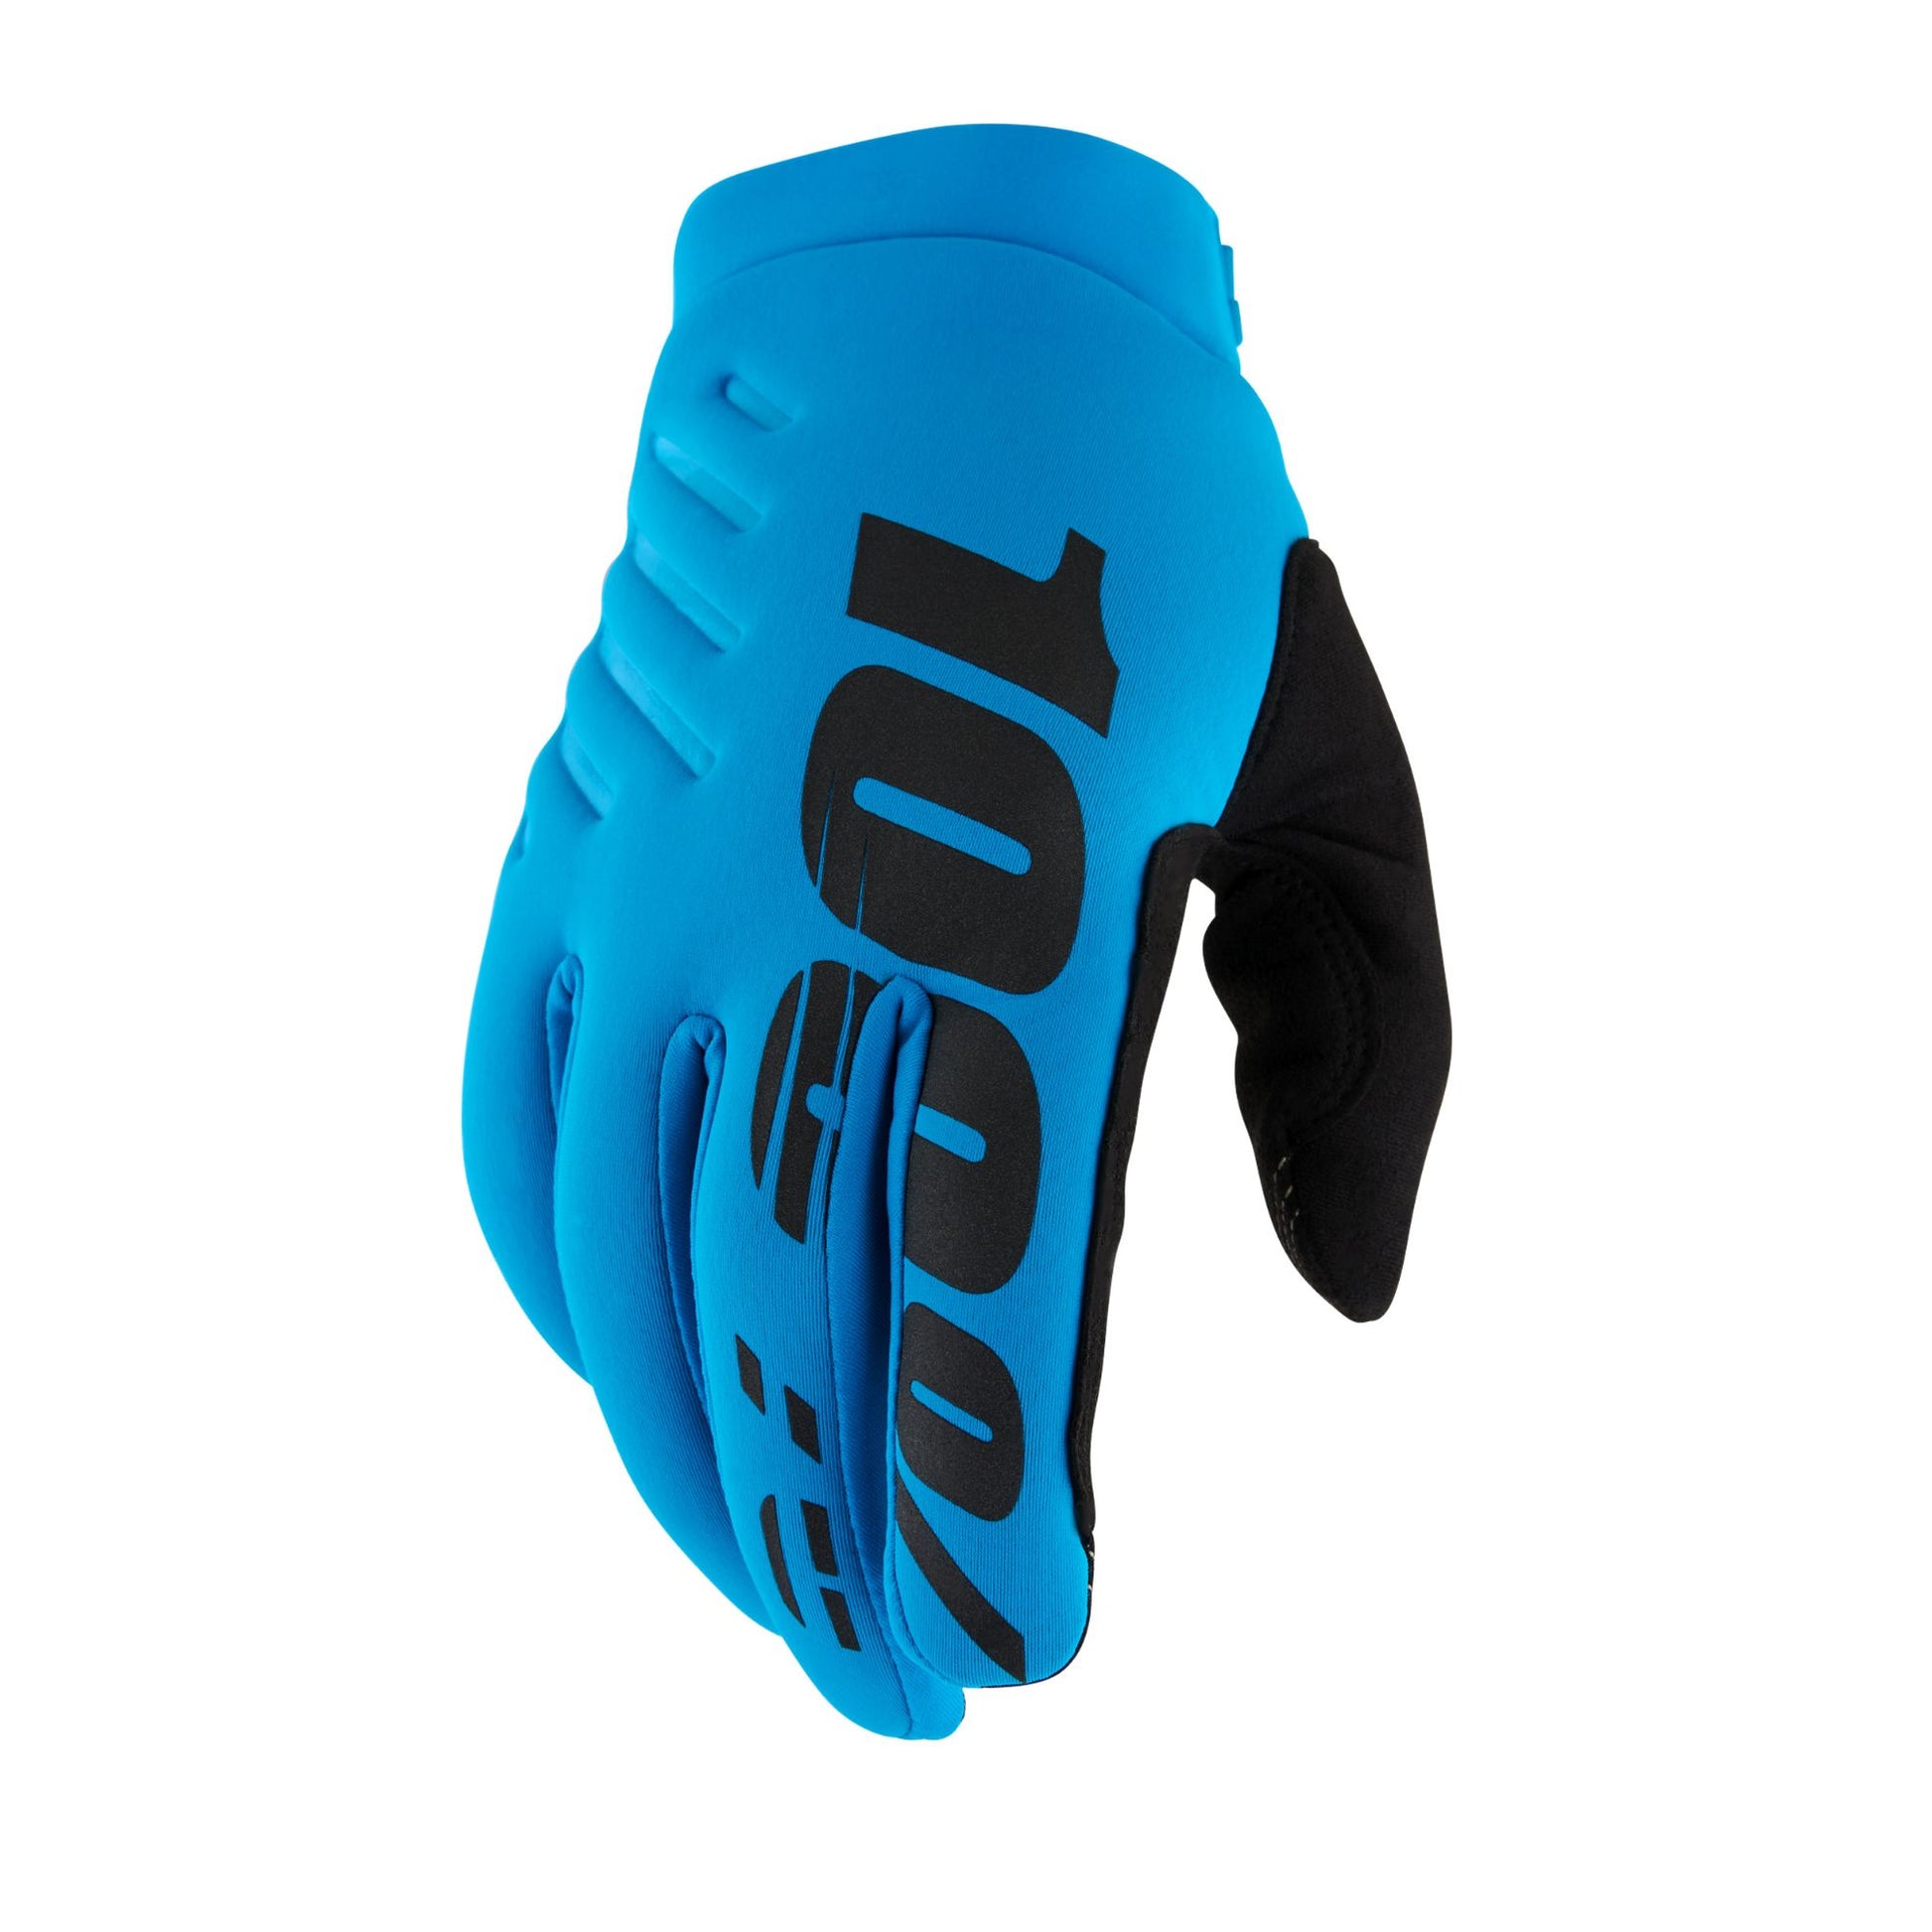 Men's Full Finger Cycling Gloves 100% Brisker AW22 Cold Weather Turquoise X Large